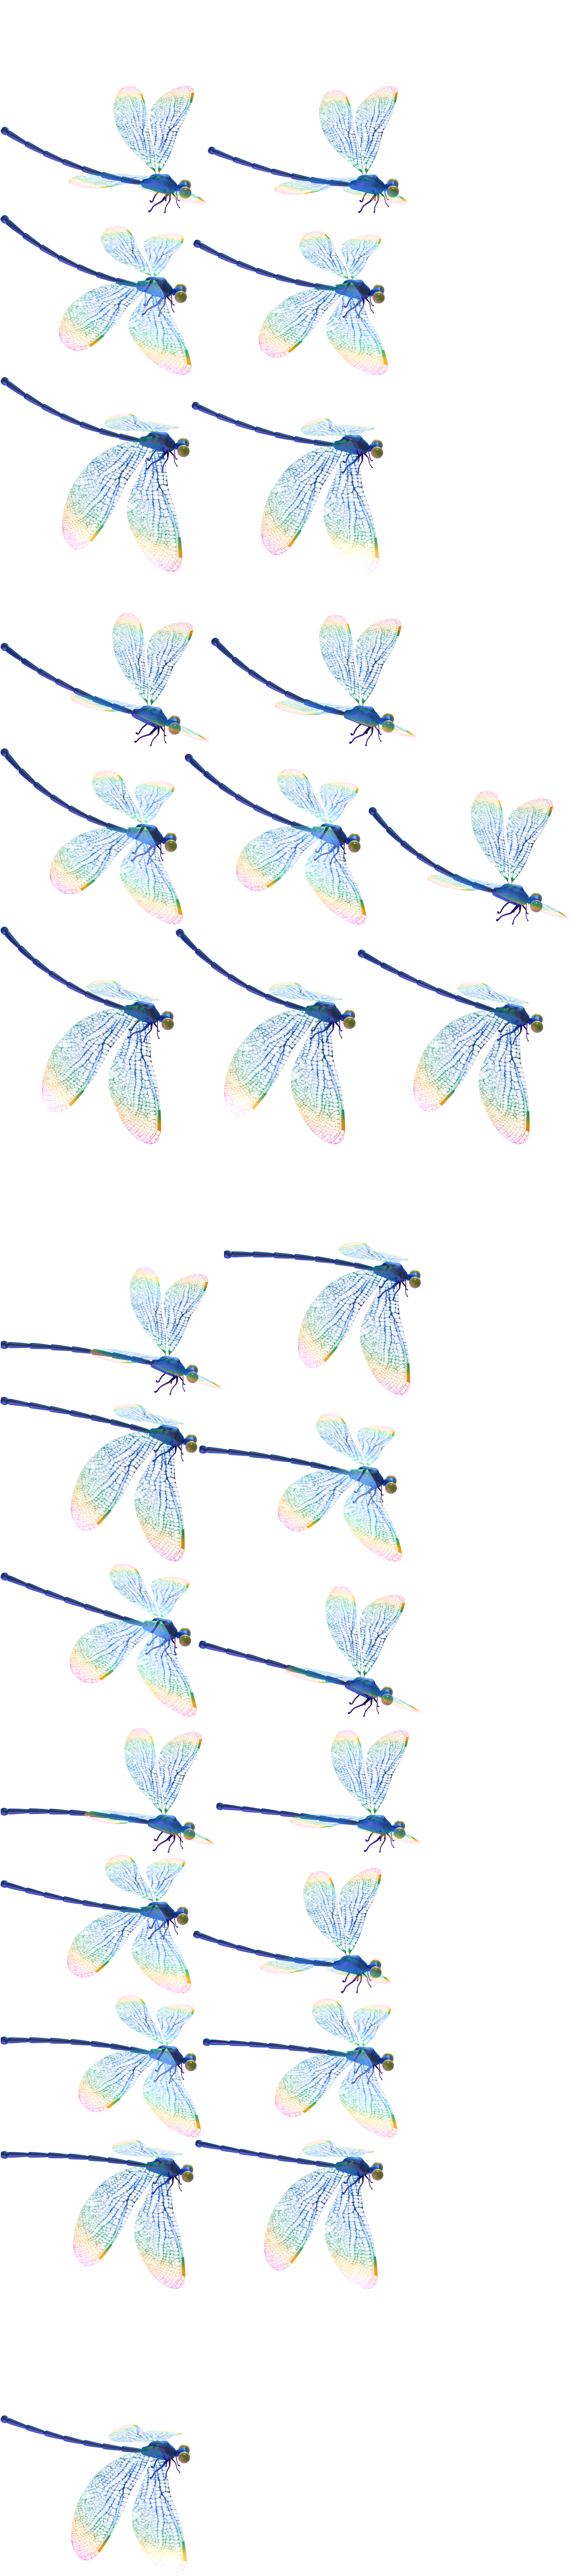 KID PIX 5: The STEAM Edition - Dragonfly